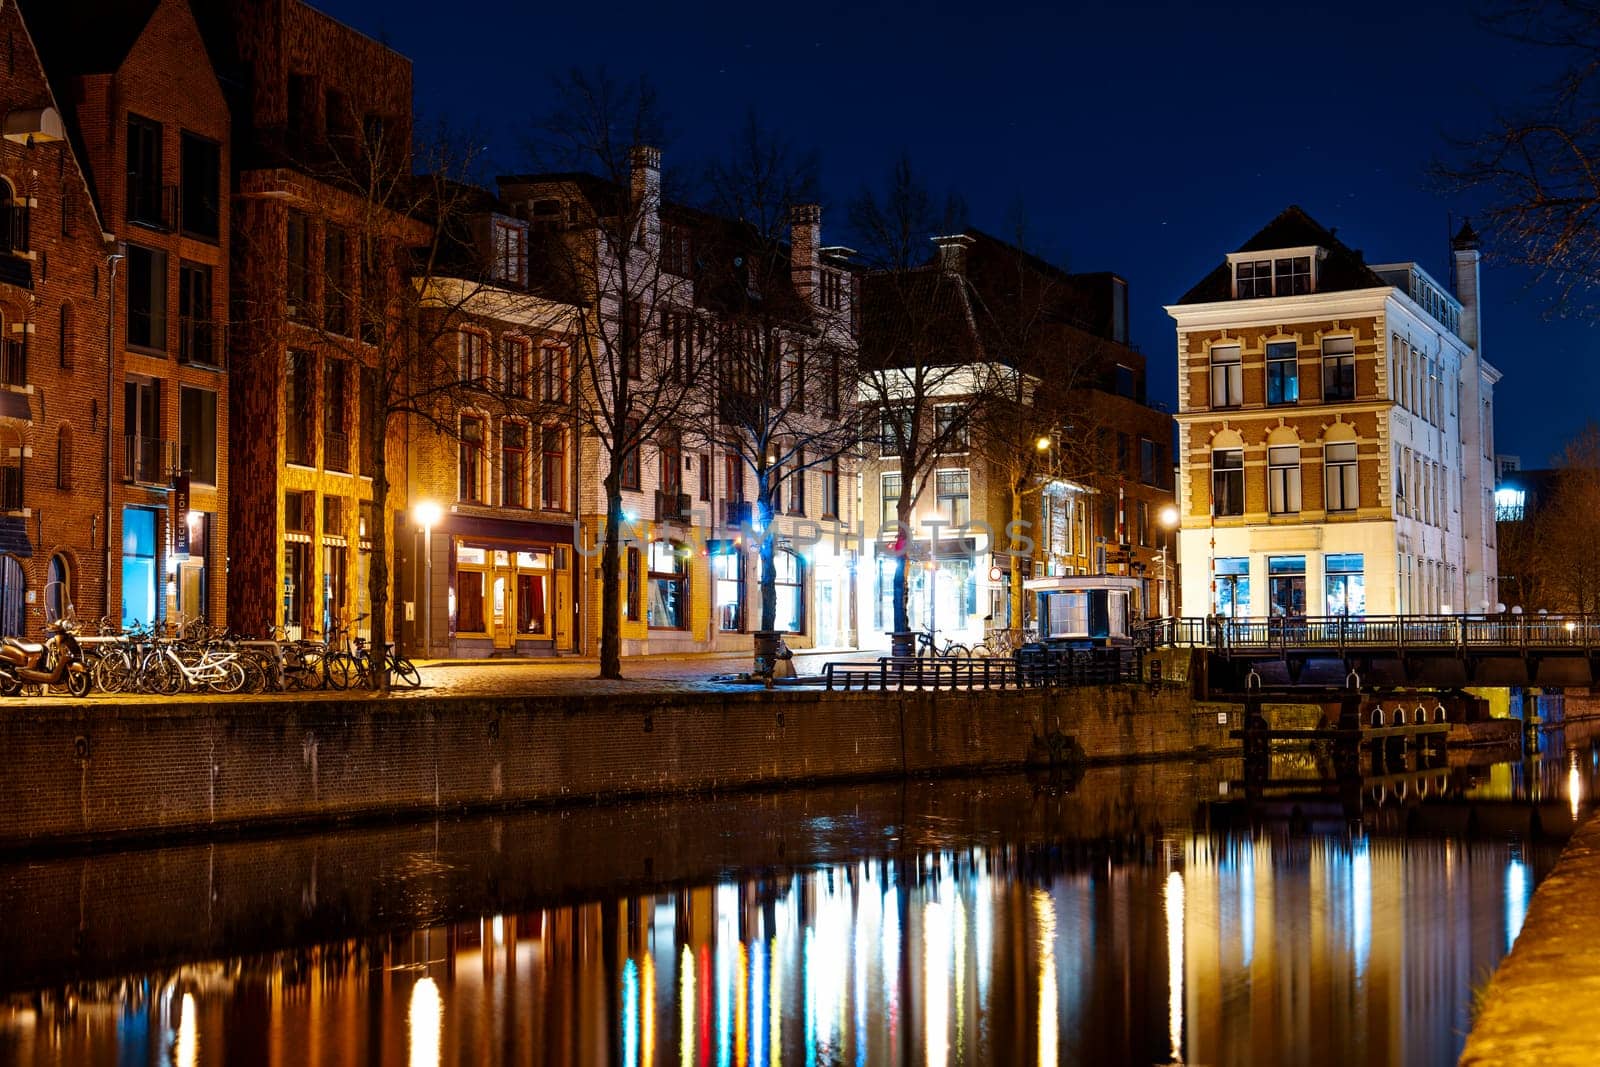 Long exposure photography capturing a mesmerizing night scene along the Amsterdam canal. The colorful lights reflecting on the serene water create a captivating and peaceful cityscape.